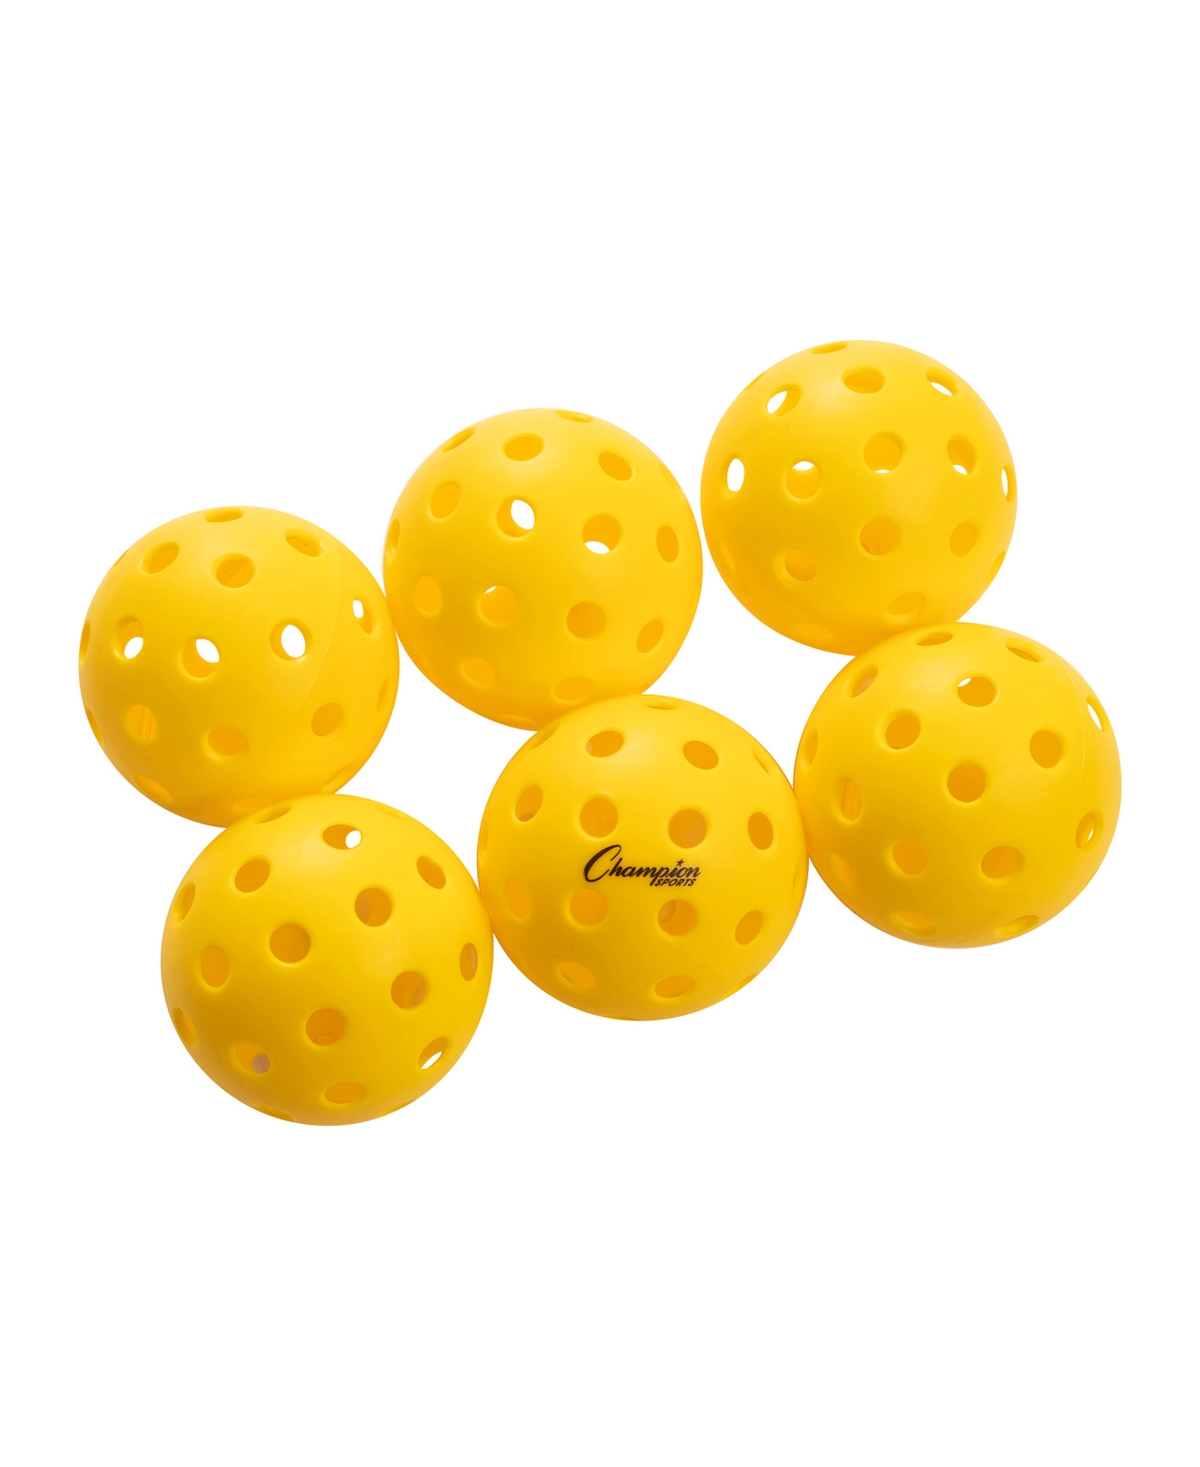 Champion Sports Recreational Outdoor Pickle Ball Set, Pack Of 6 In Yellow